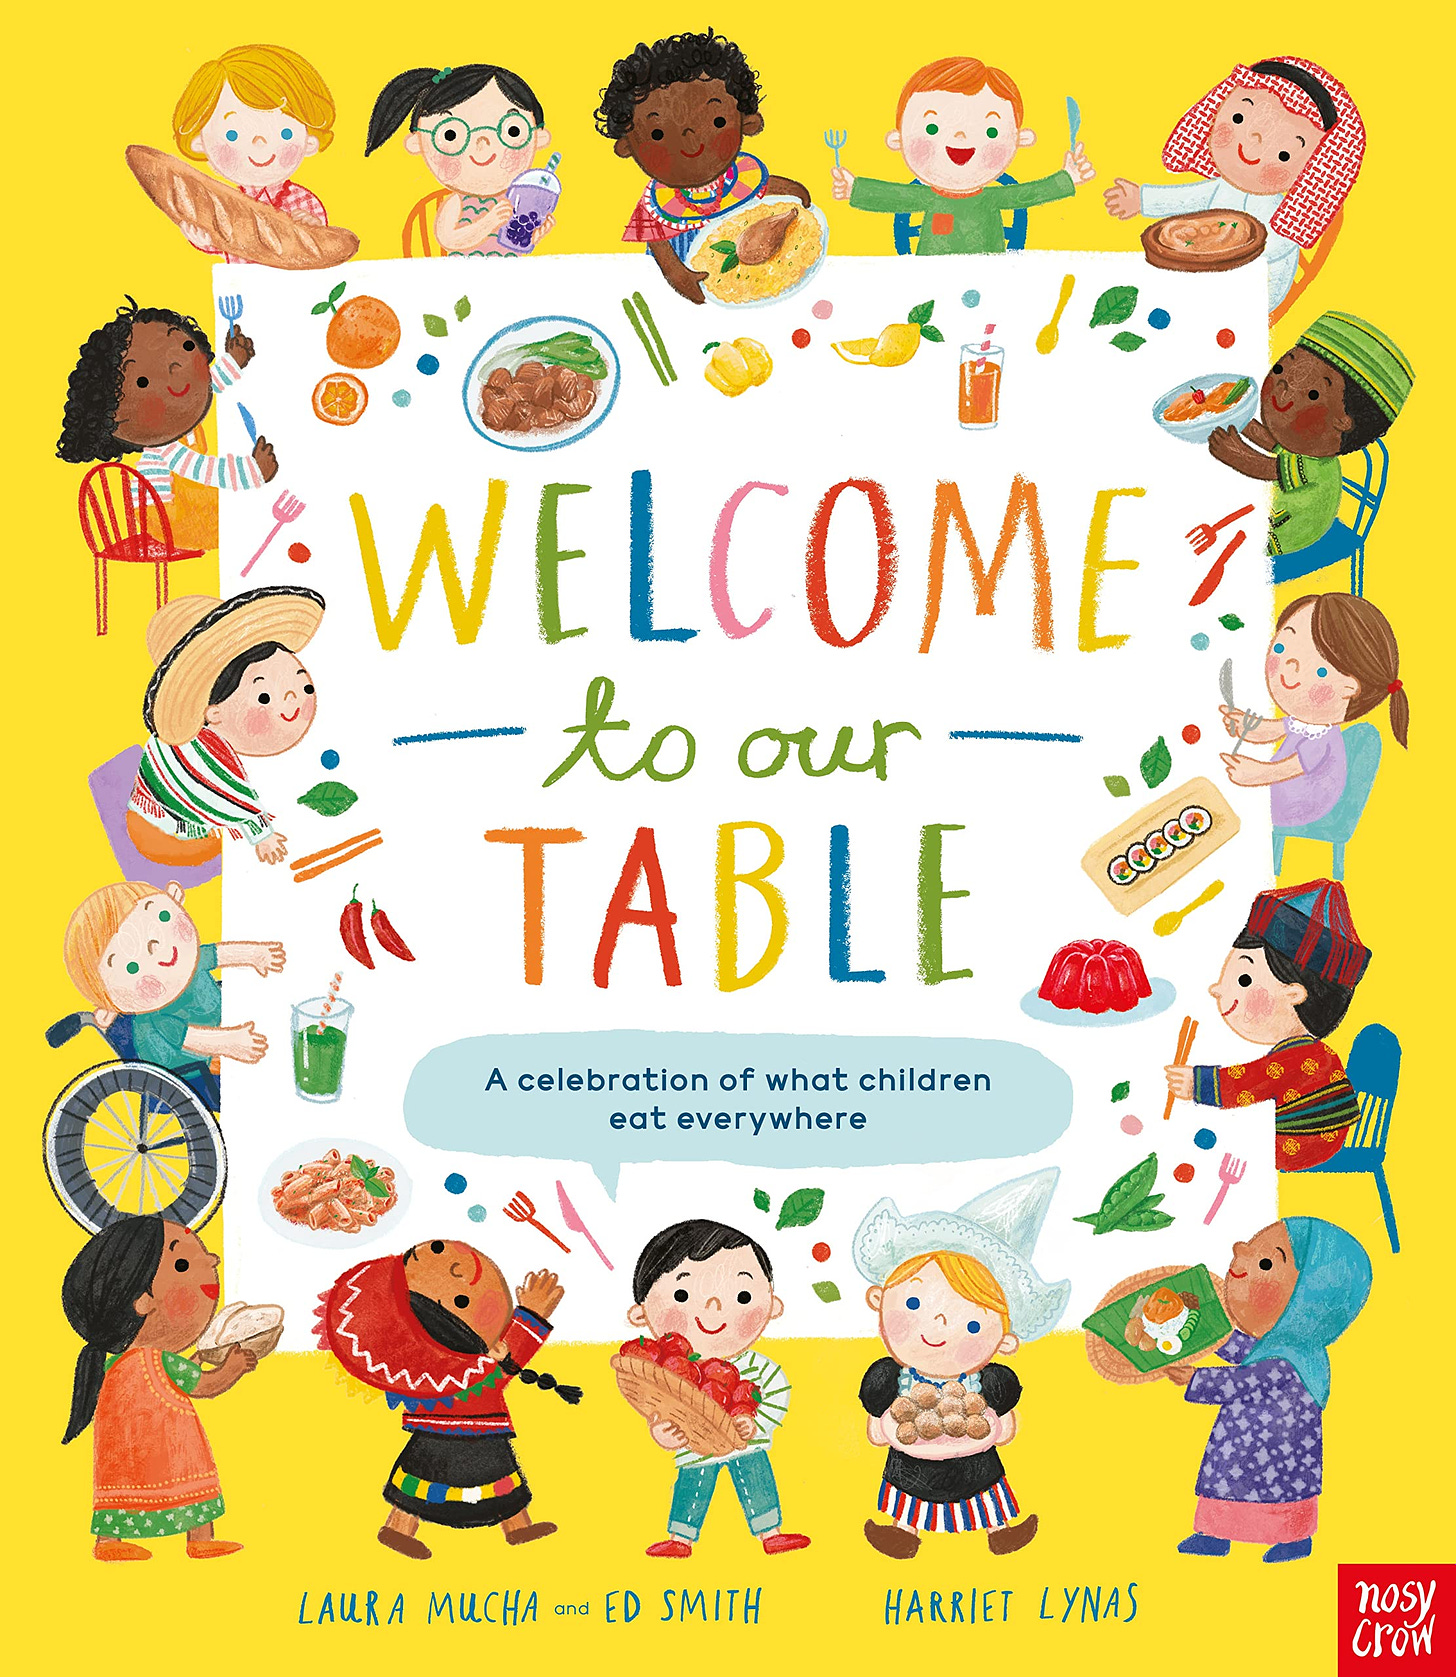 Welcome to Our Table: A Celebration of What Children Eat Everywhere by Laura Mucha and Ed Smith, with illustrations by Harriet Lynas